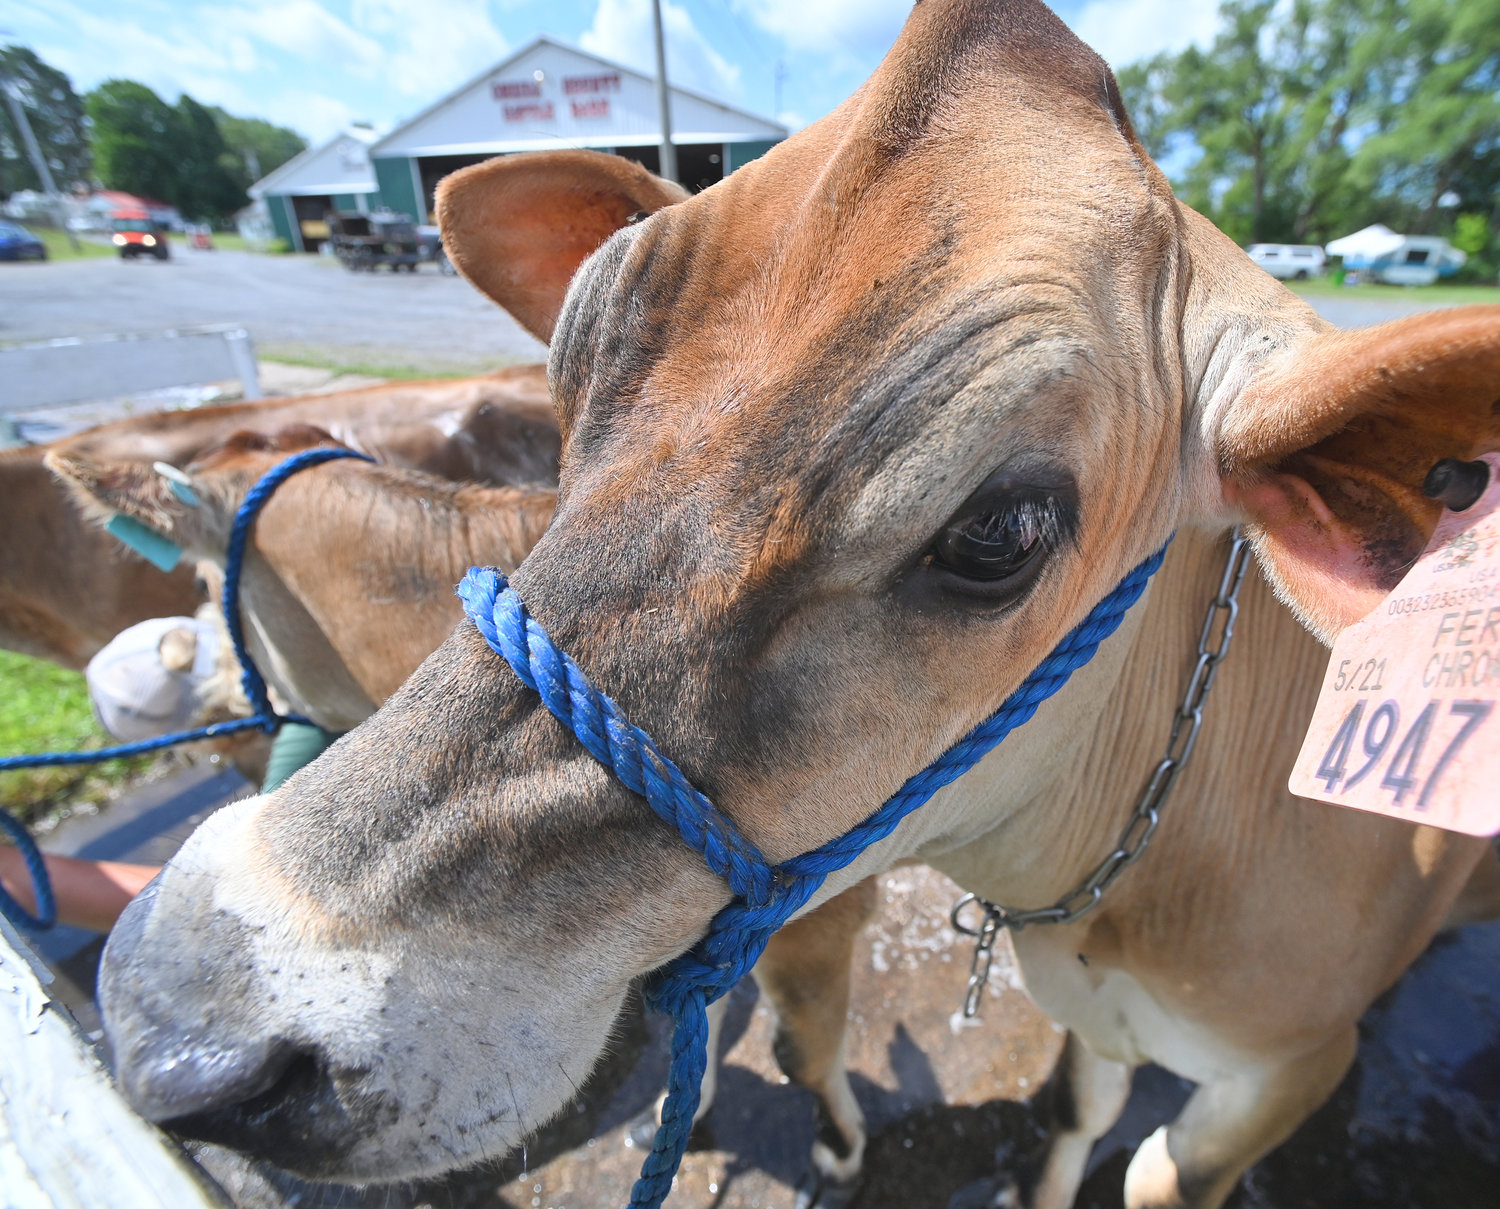 A brown Swiss cow has "her eye on the prize" as she awaits her turn to get washed up for the Boonville-Oneida County Fair this week.